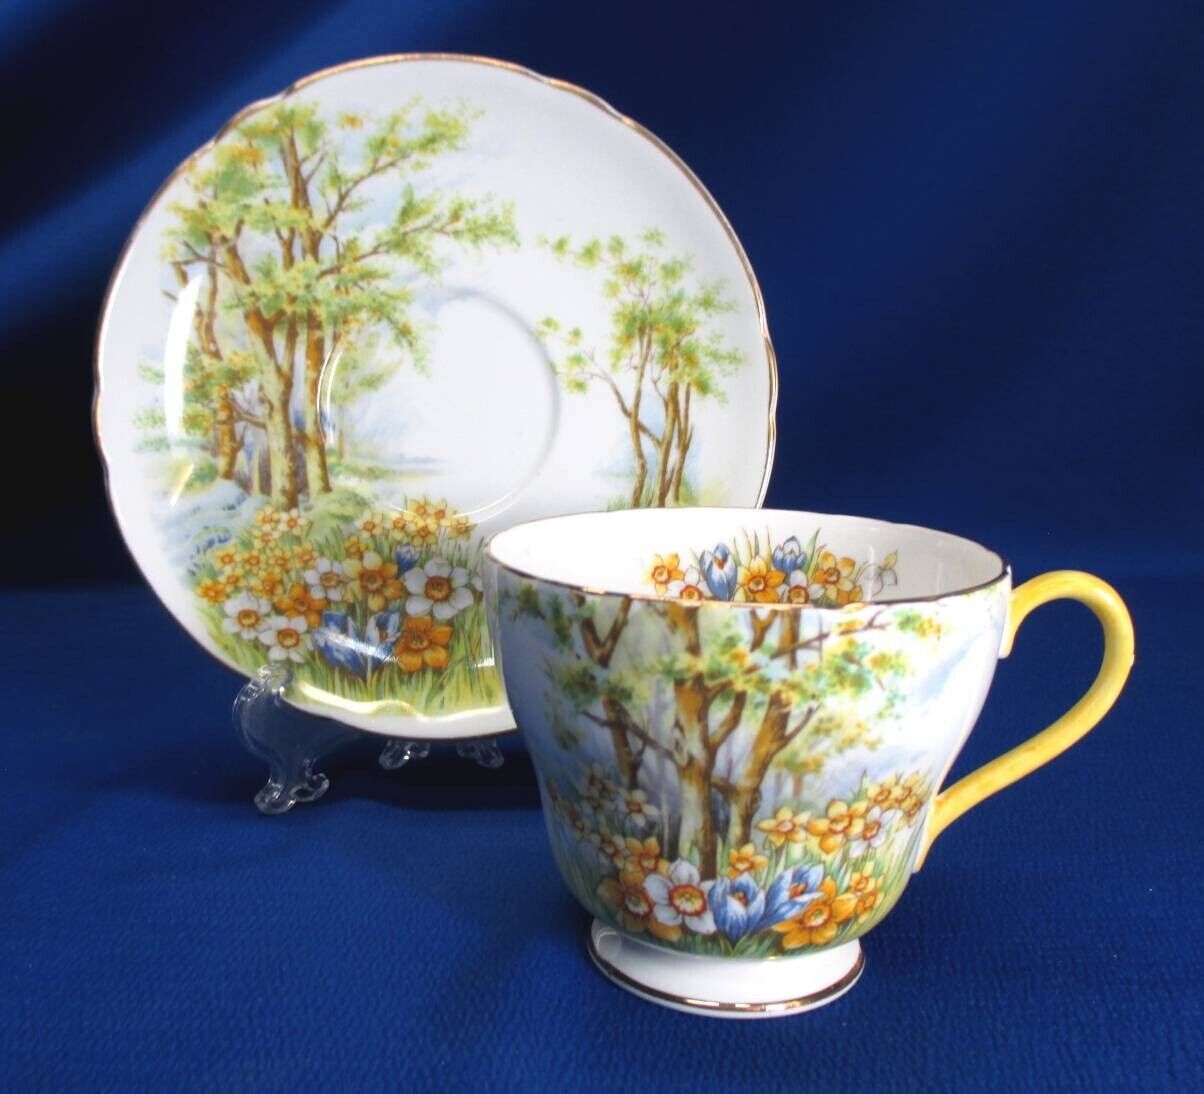 SHELLEY FINE BONE CHINA CUP AND SAUCER IN DAFFODIL TIME PATTERN